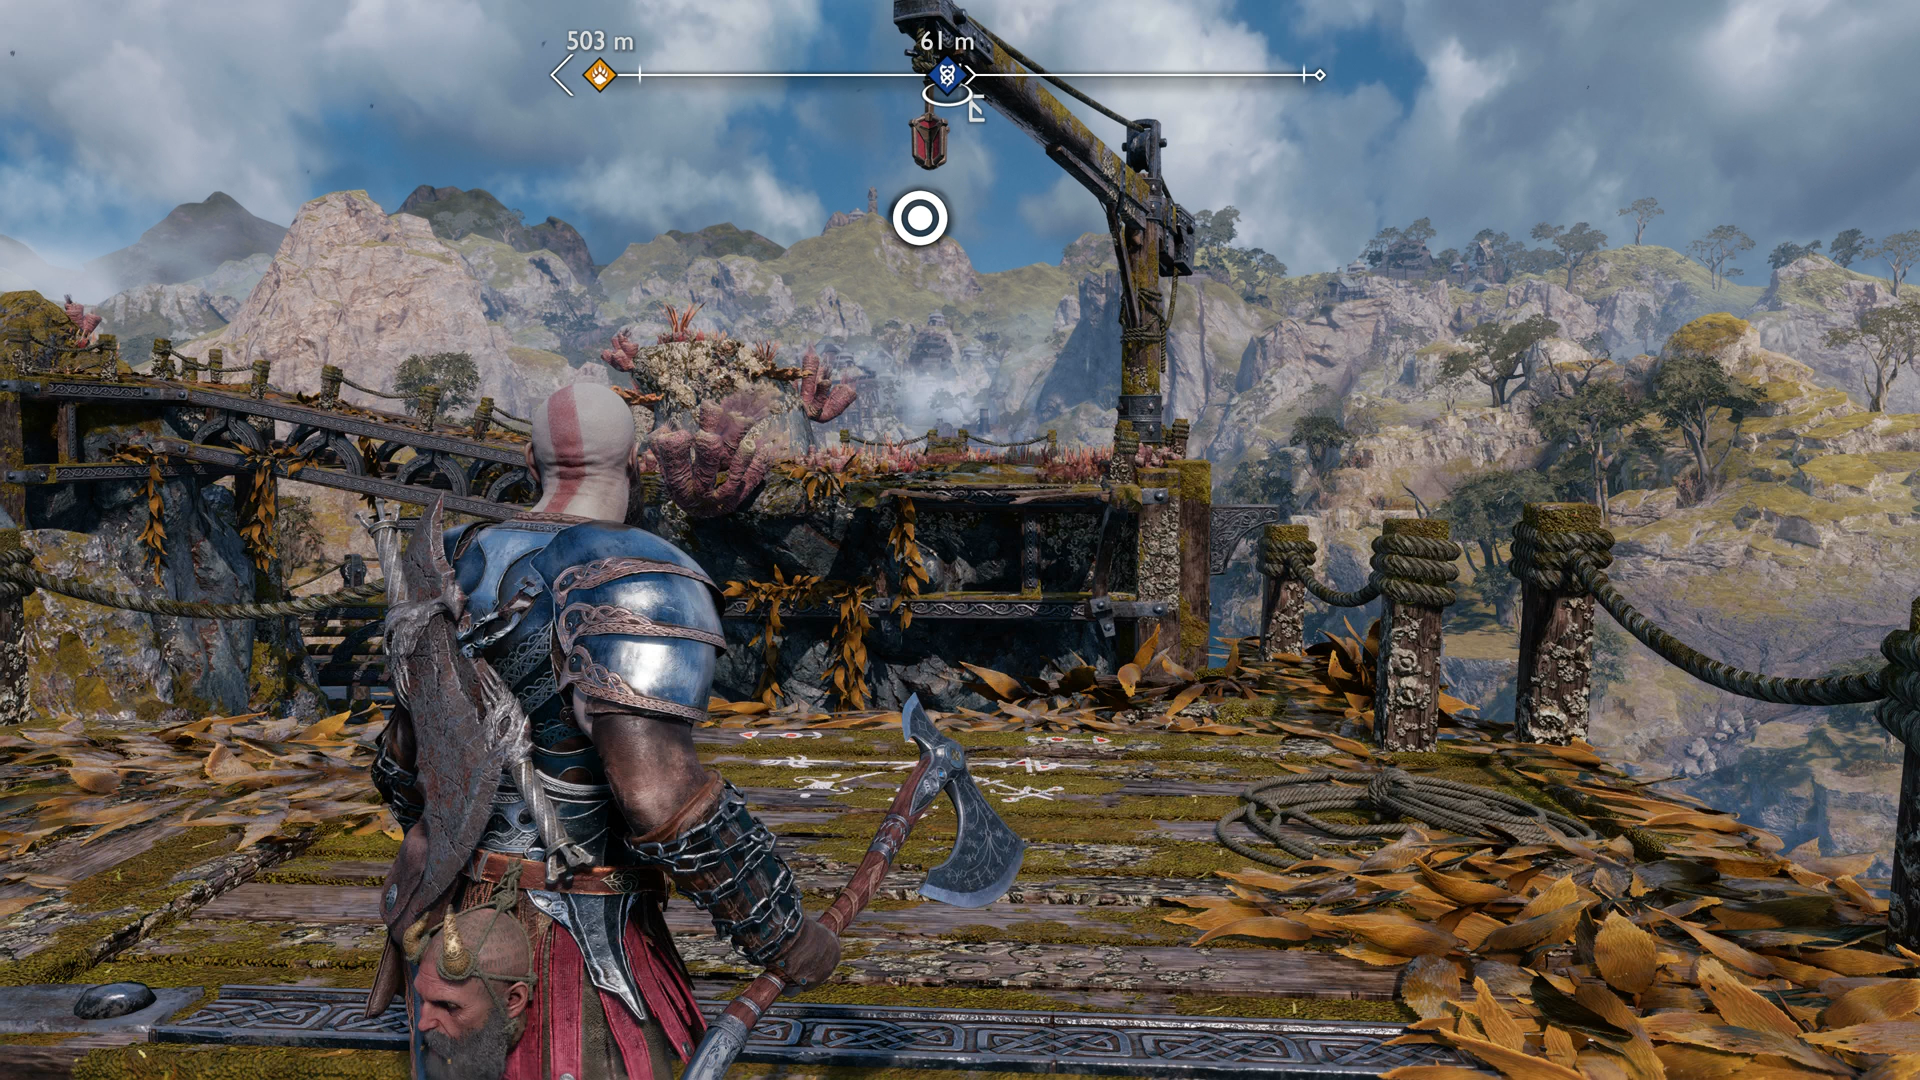 Kratos using his Blades of Chaos to swing across a gap in the Weight of Chains quest